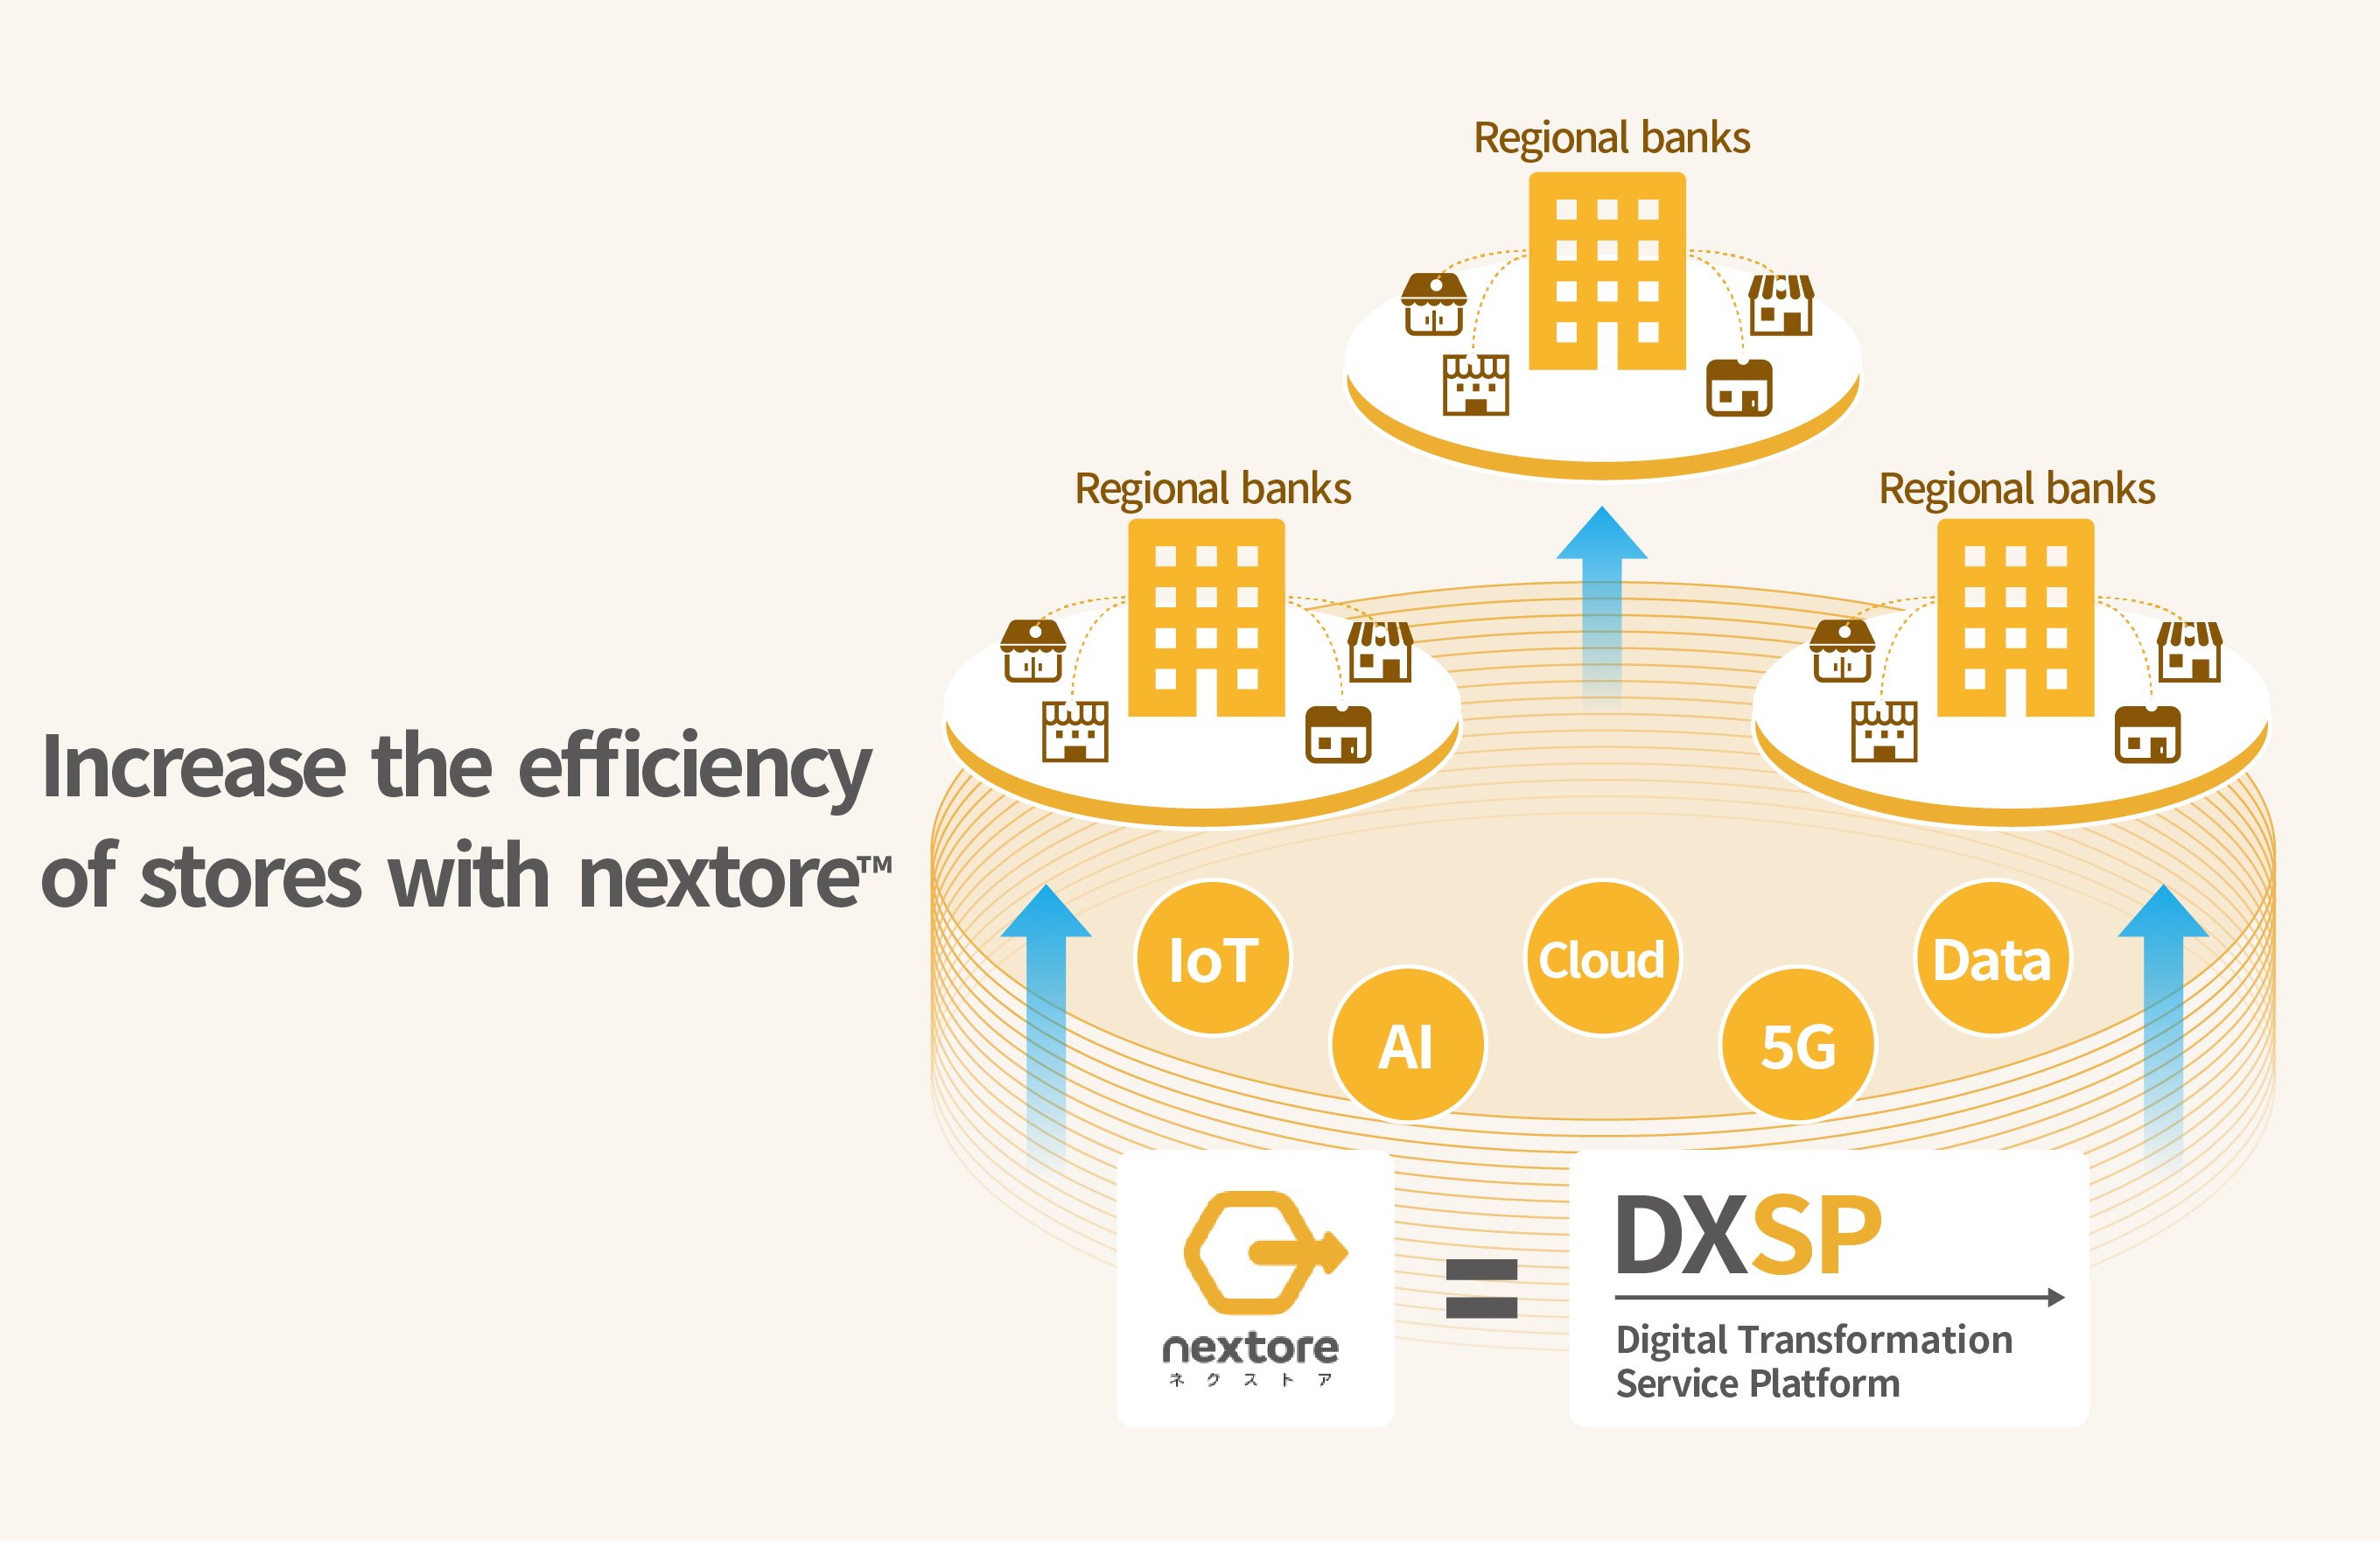 Increase the efficiency of stores with nextore™